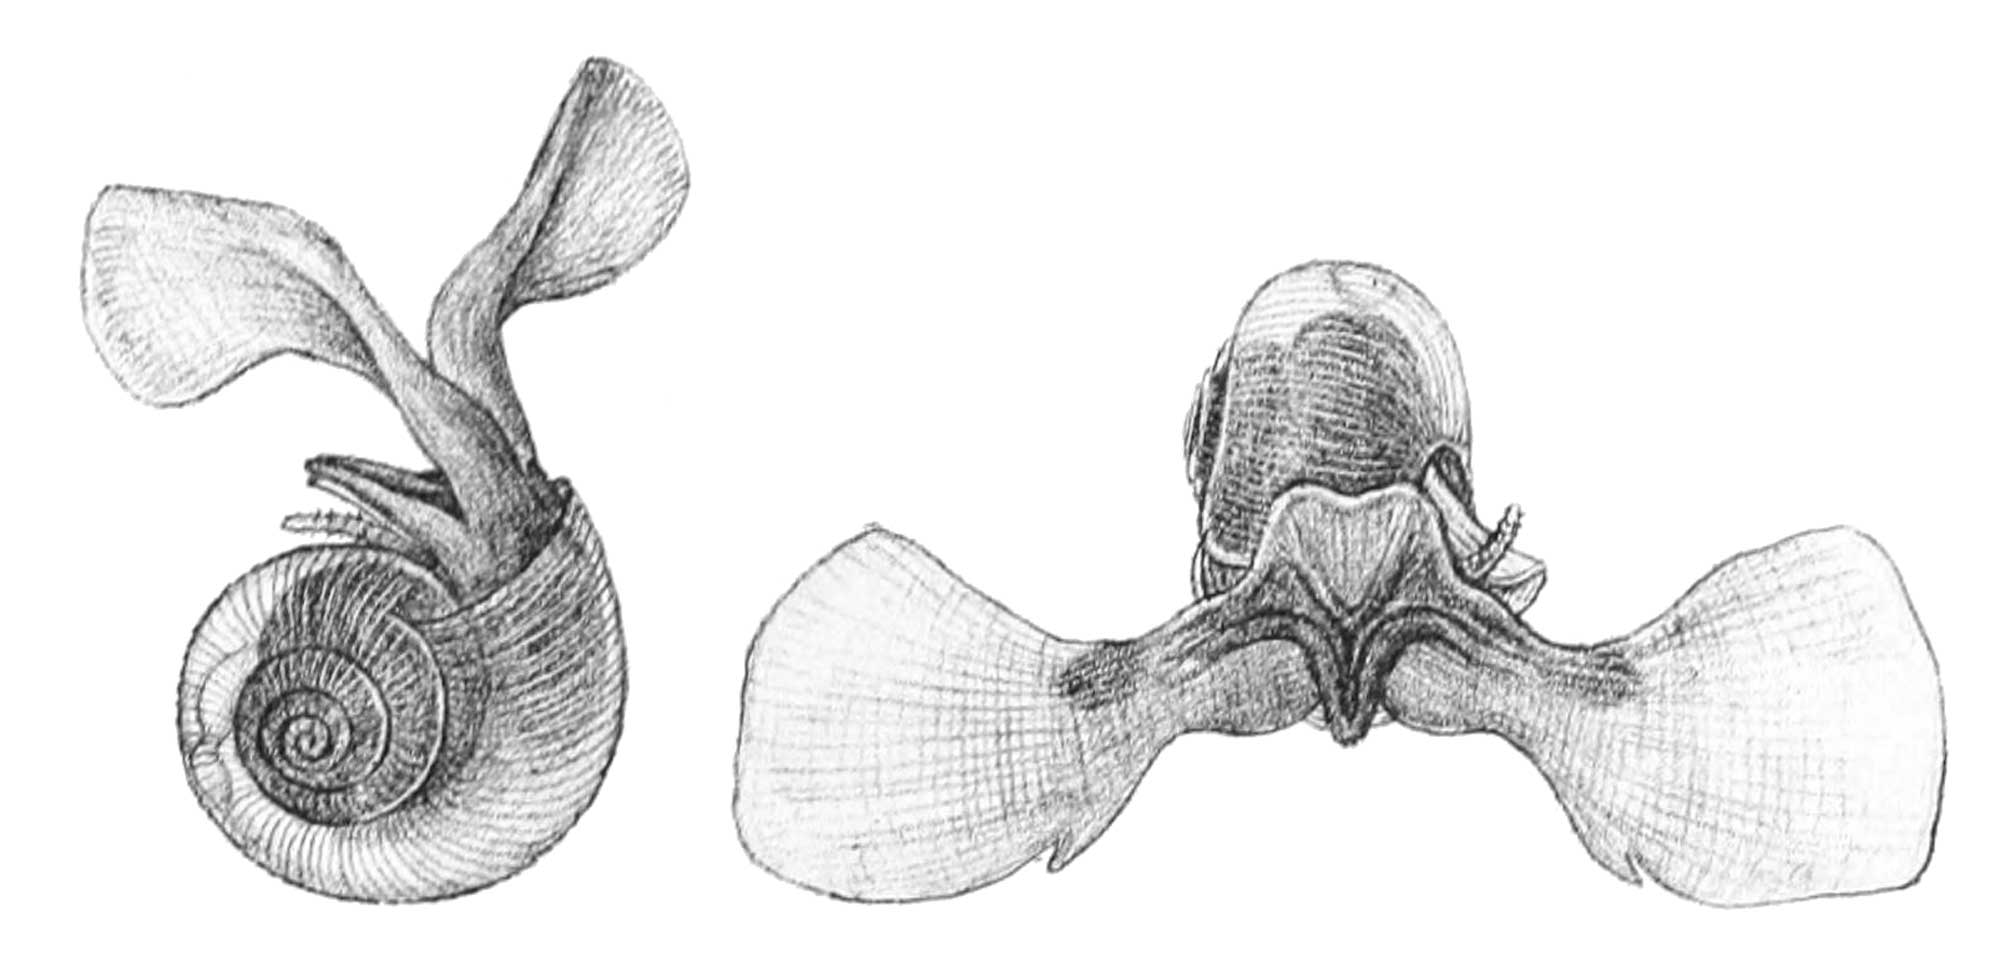 Illustration showing two drawings of the modern pteropod Limacina helicina.